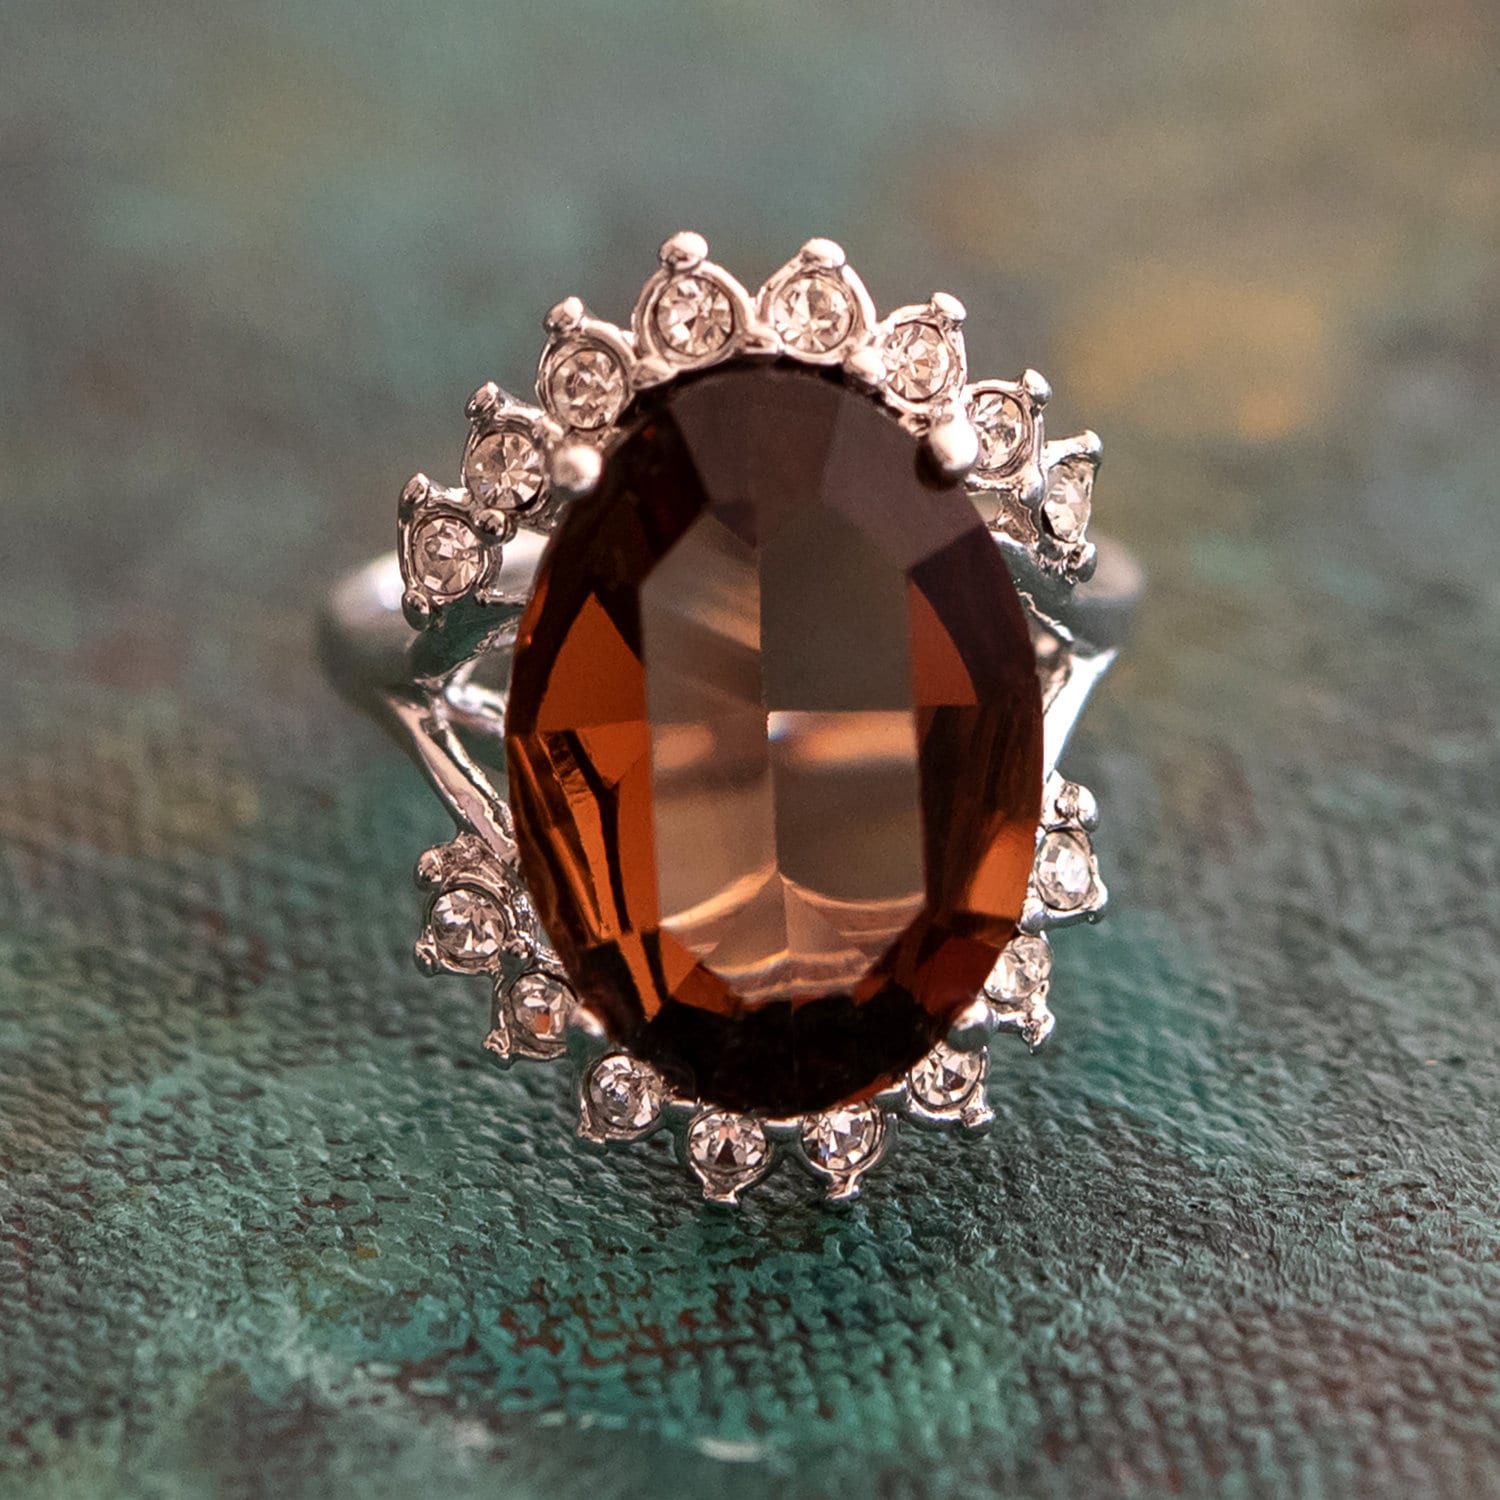 Vintage Ring 1970's Ring Smoke Topaz and Clear Swarovski Crystals 18k White Gold Silver Plated Band R1909 - Limited Stock - Never Worn